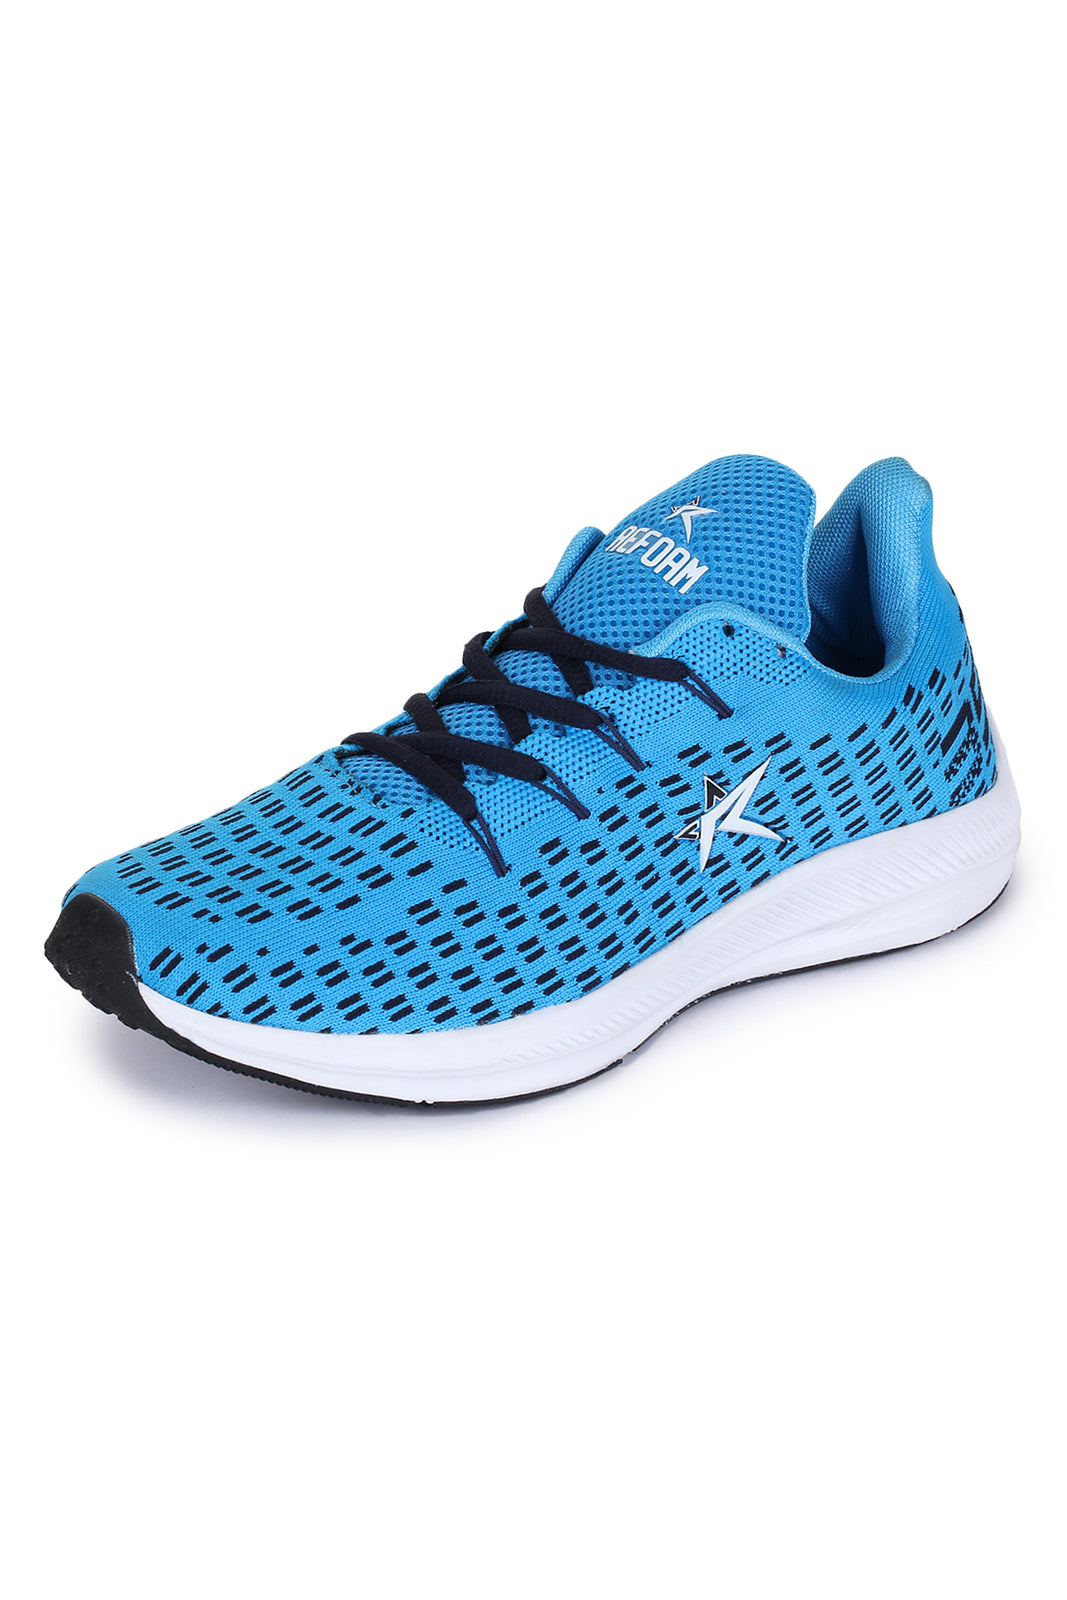 Sky Blue Solid Mesh Lace Up Running Sport Shoes For Men